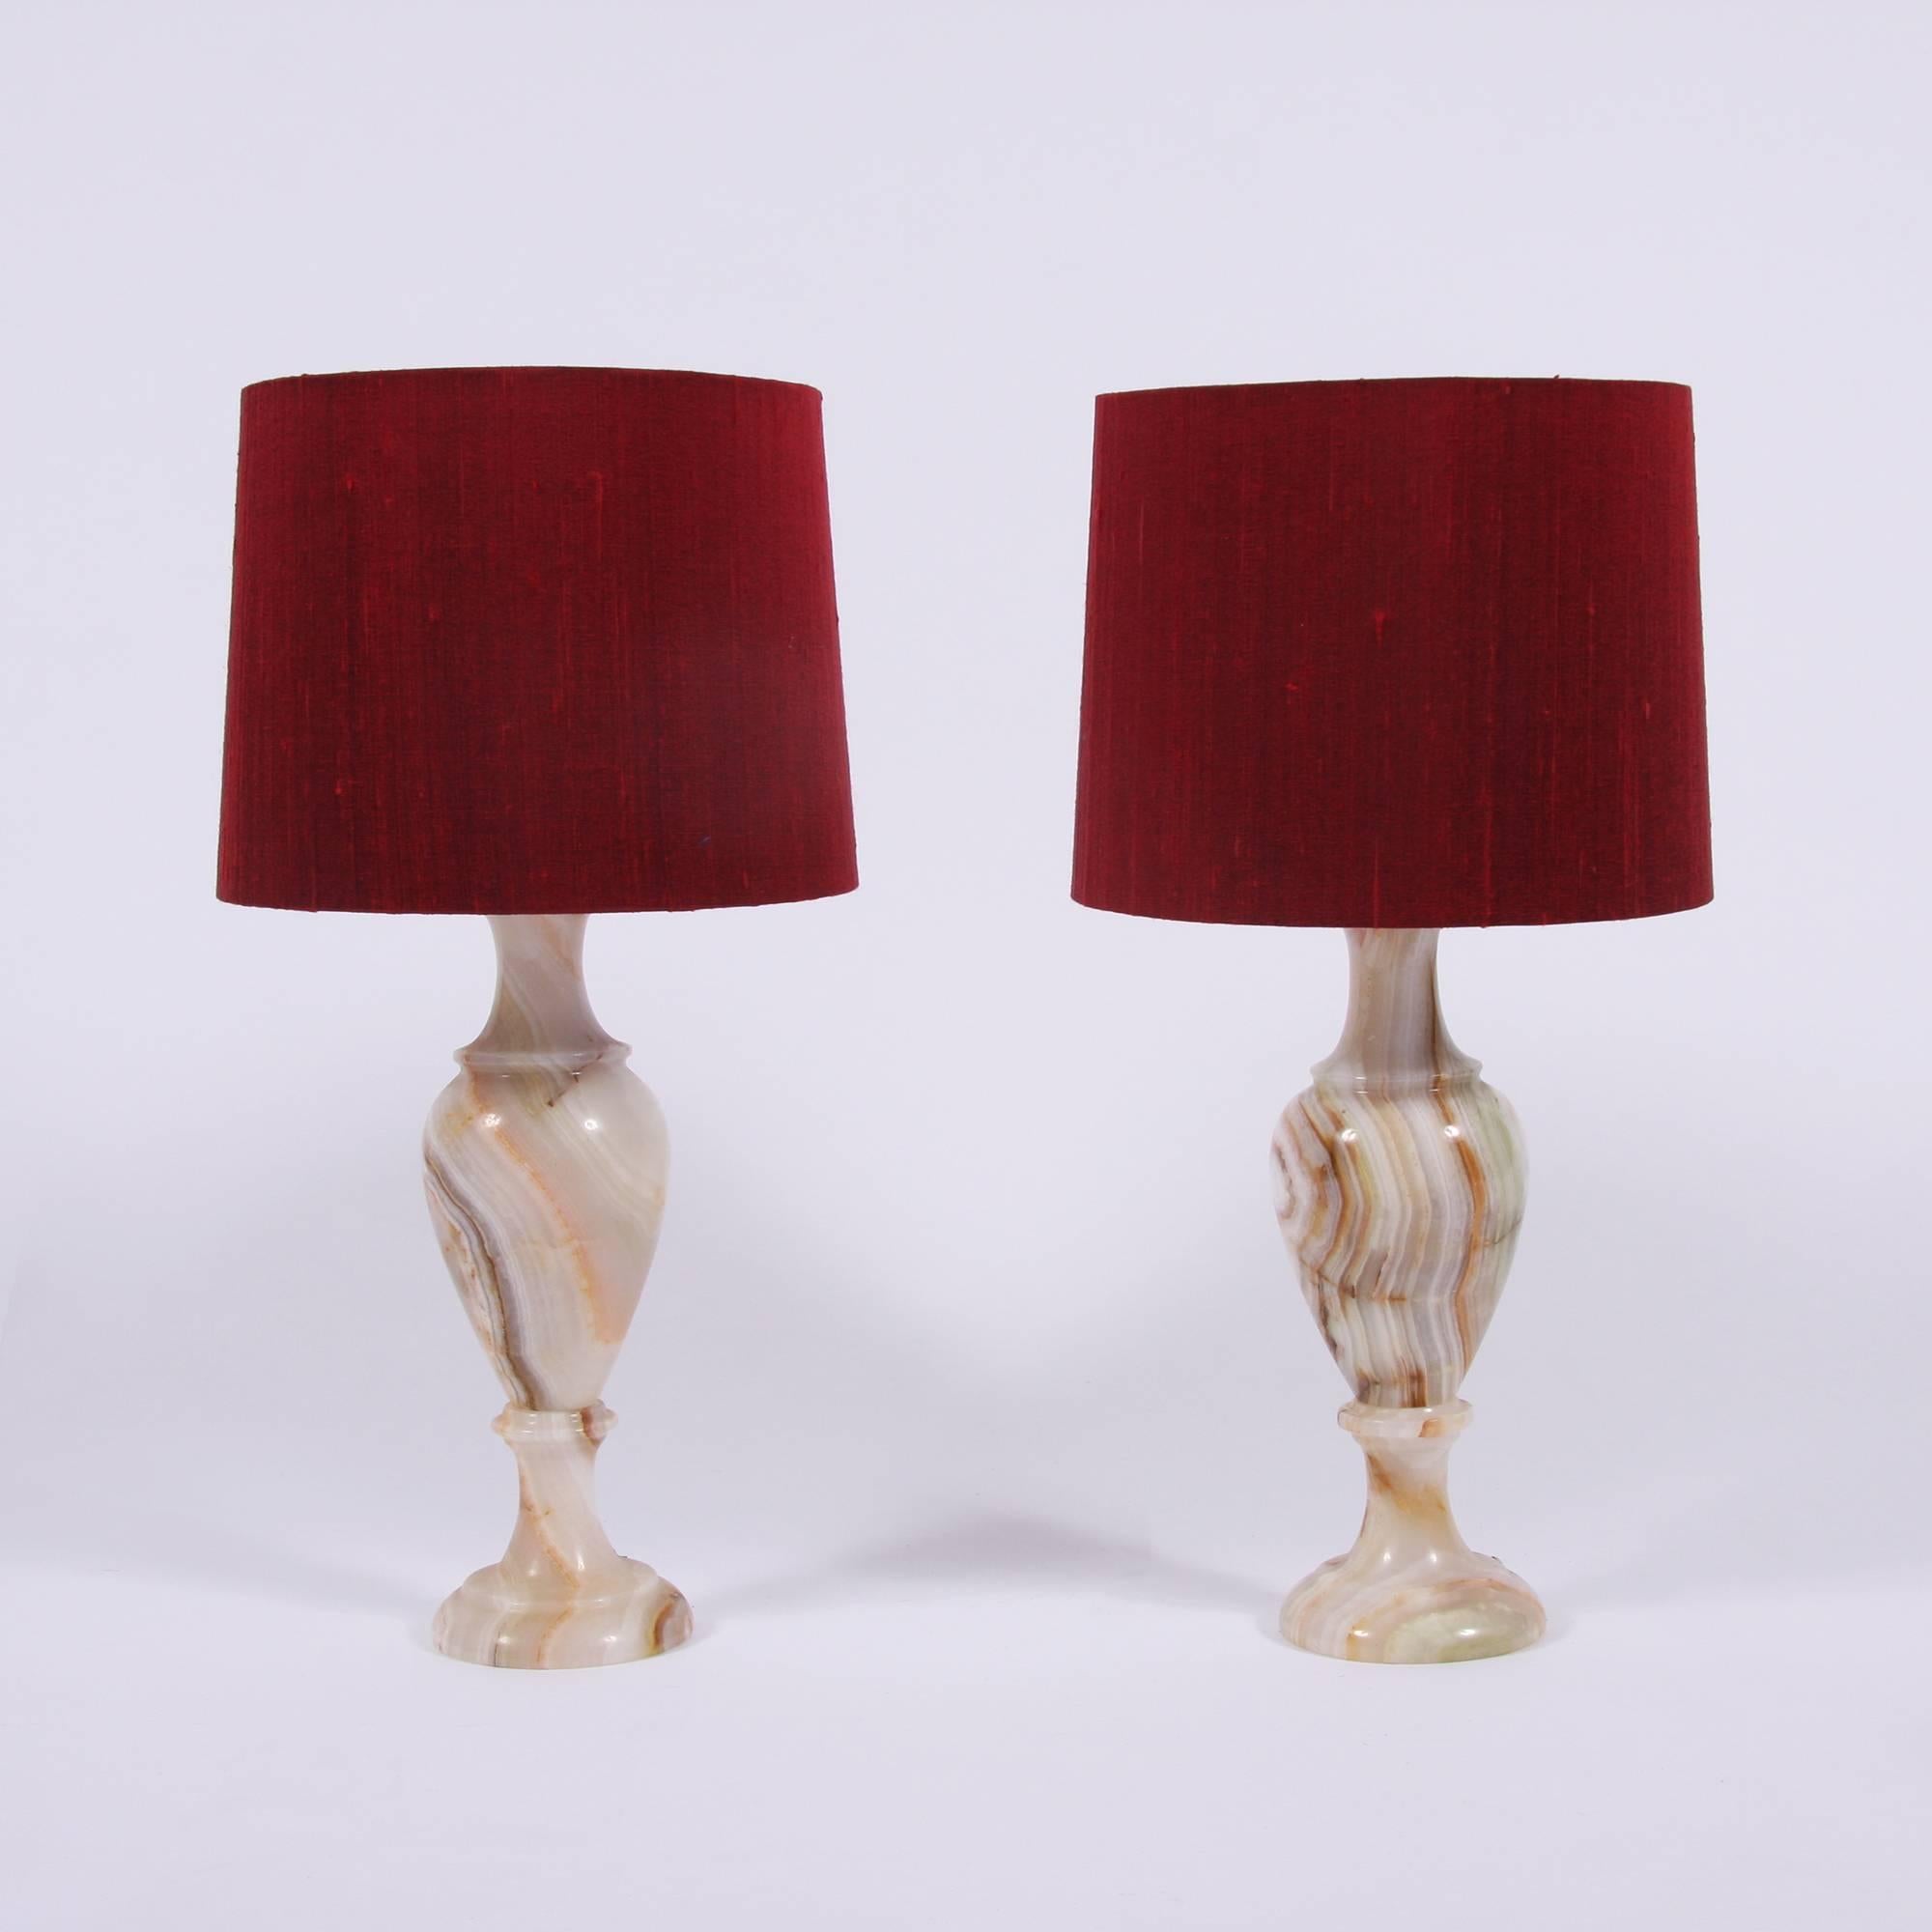 A pair of elegant, French Mid-20th century, urn shaped alabaster table lamps. The alabaster has lovely warm veining through it.
In excellent condition.
Pictured with bespoke silk handmade shades. Height is to the top of the shade.
Rewired and PAT